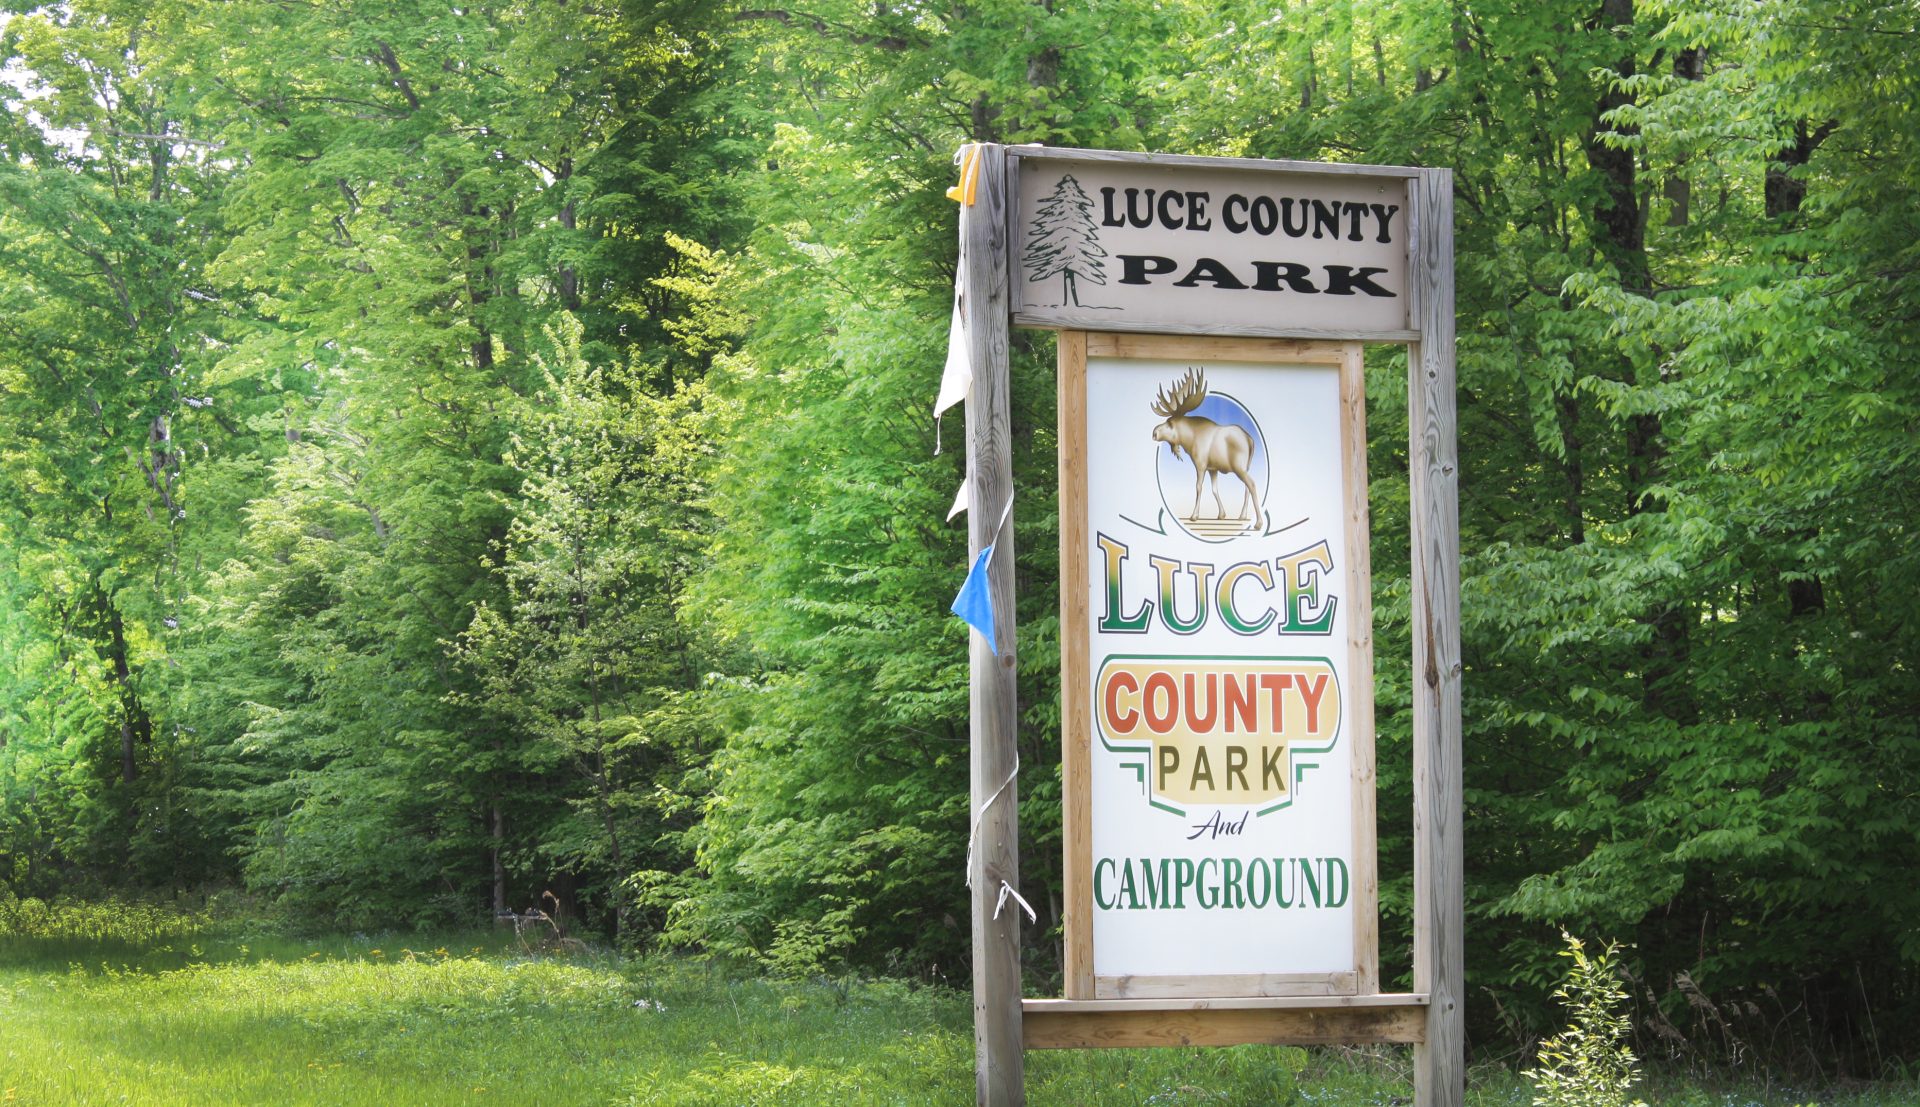 Luce County Park and Campground wooden sign in front of woods